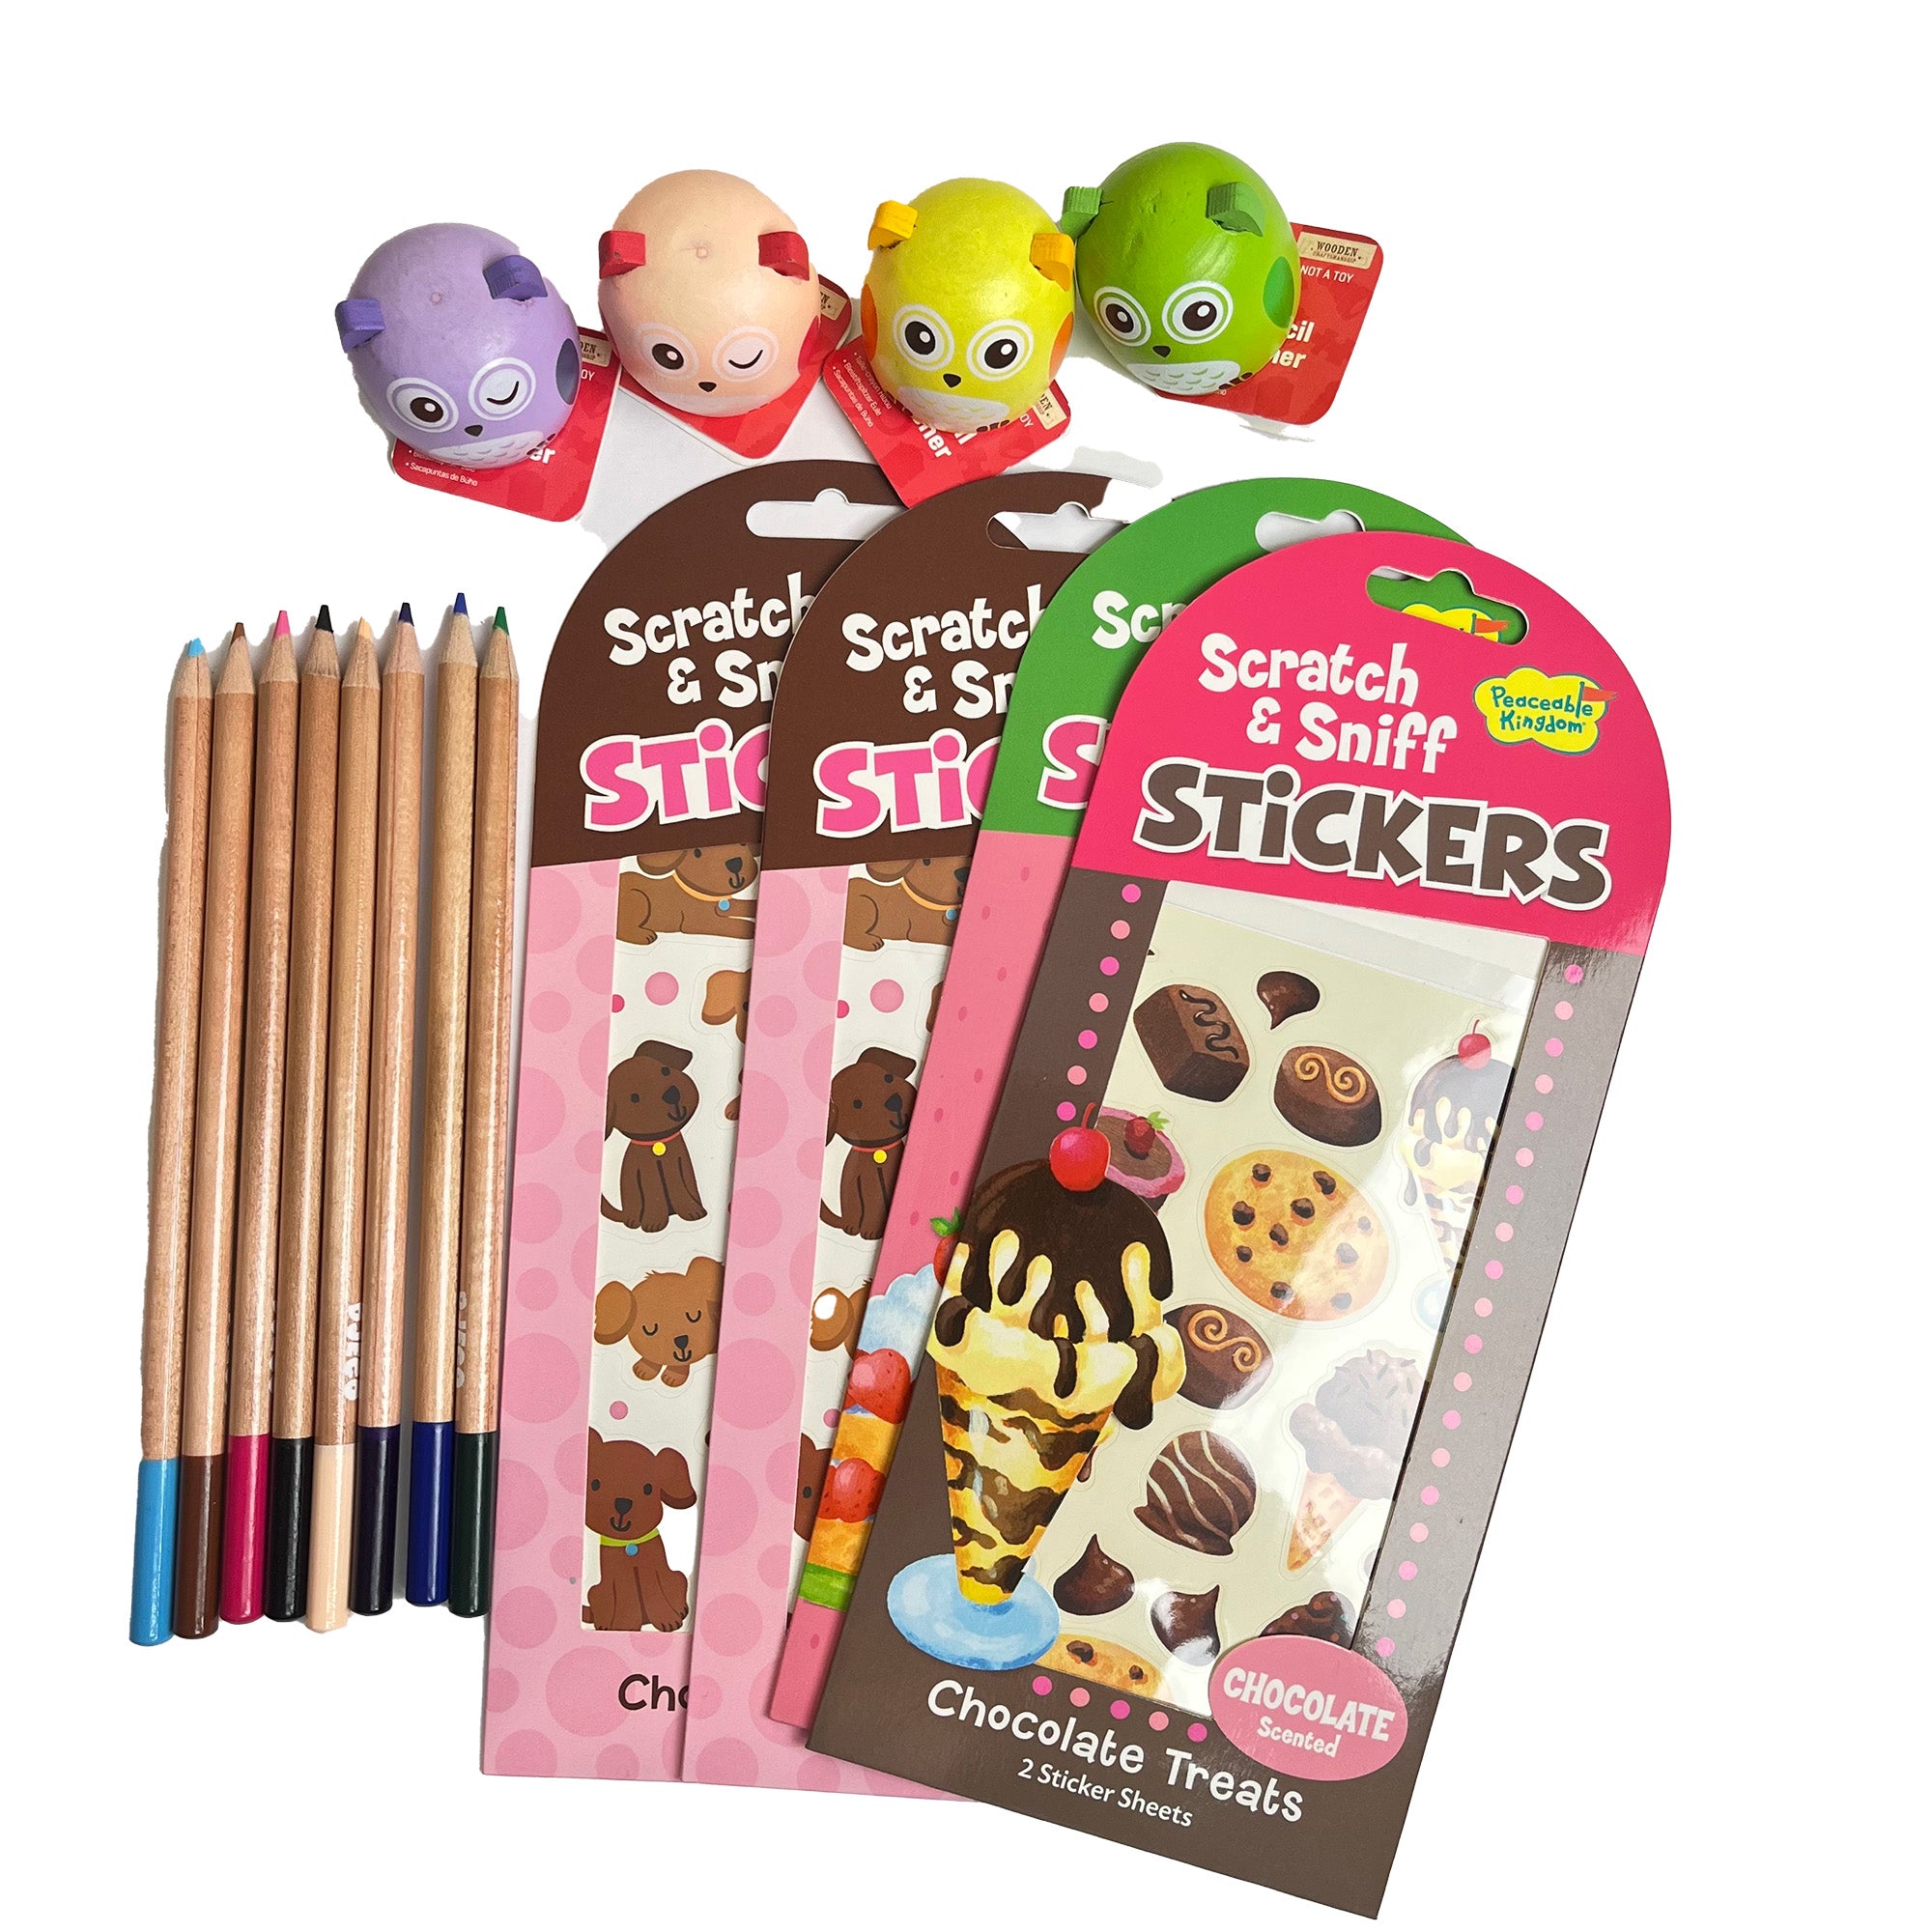 Party Pack - Assorted Girls Gifts for 4 Kids